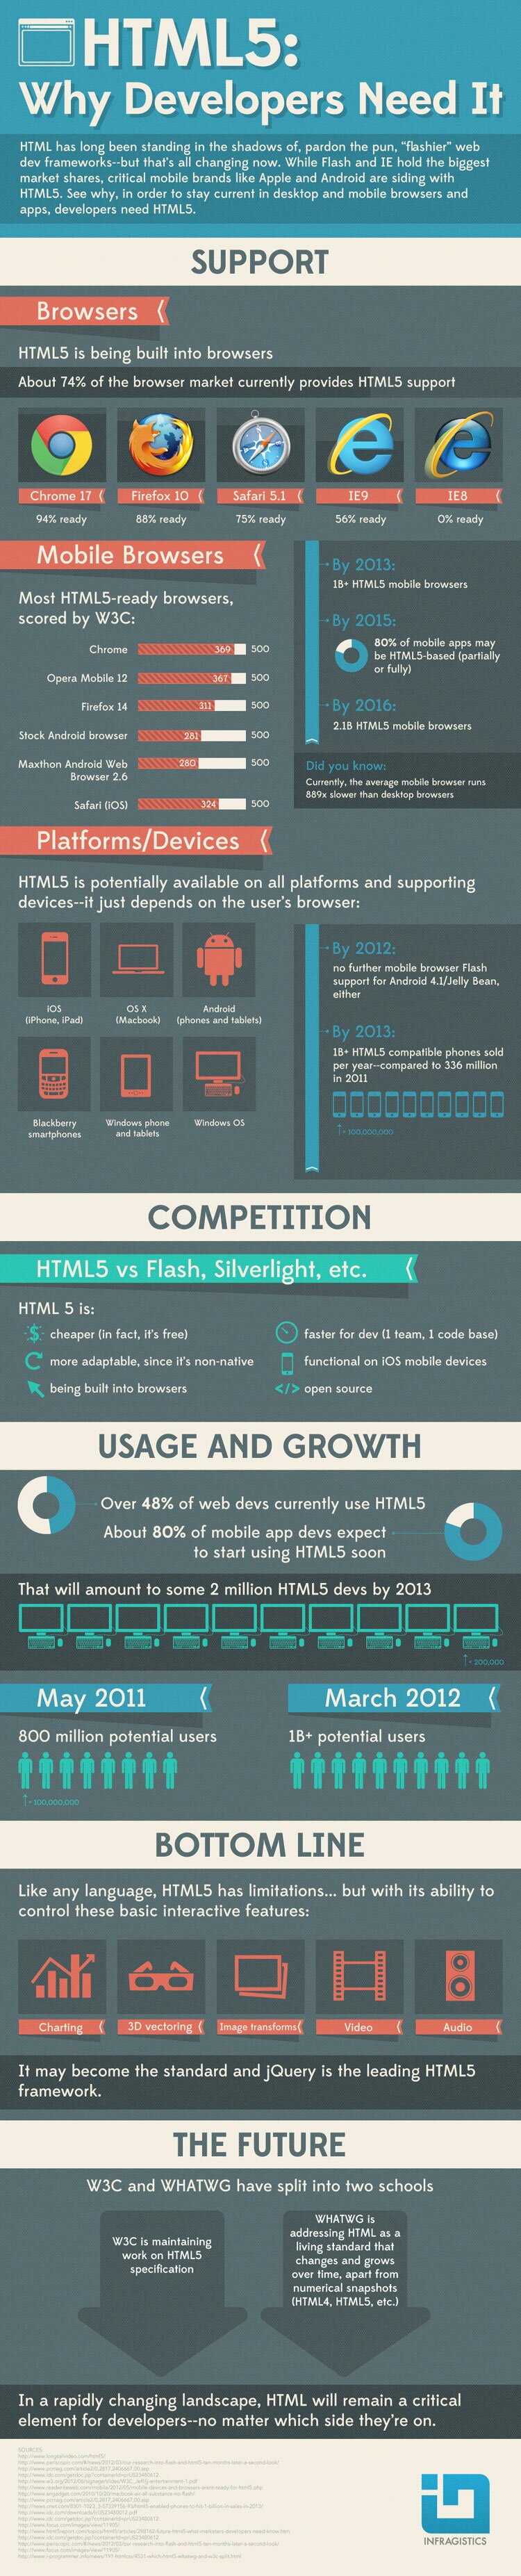 The bigger version of HTML5: Why Developers Need It